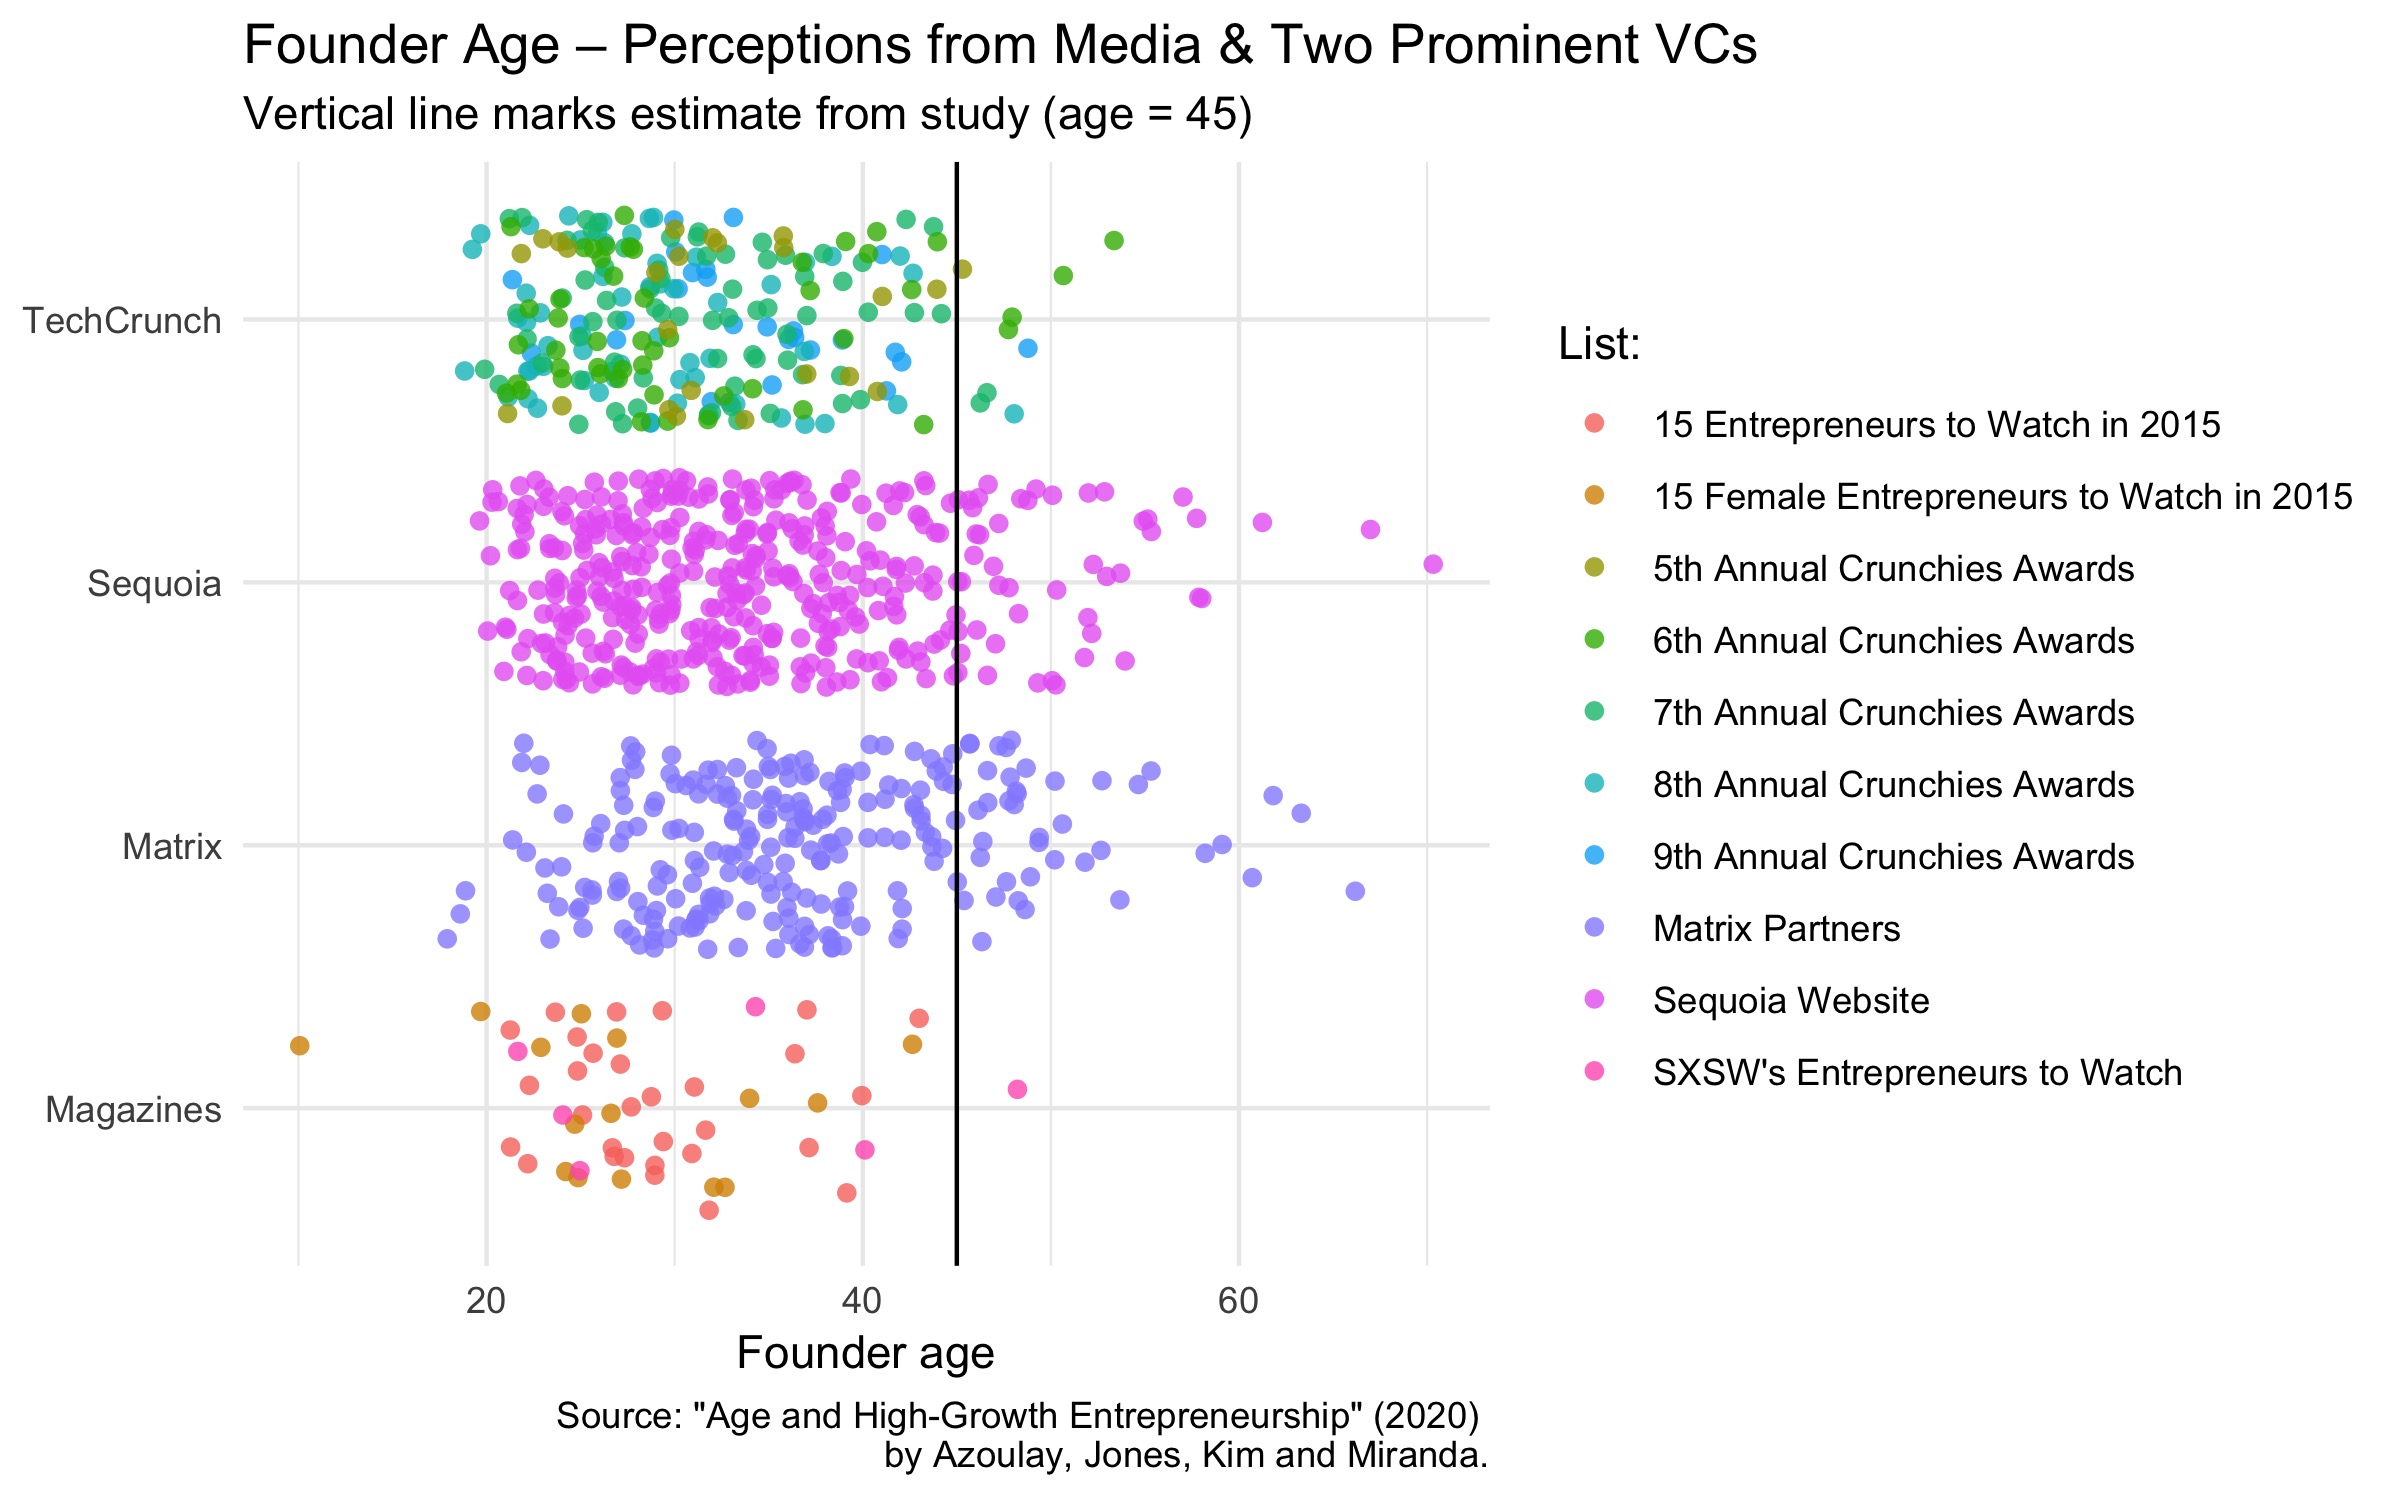 Typical startup founder age as portrayed by two media sources and two prominent venture capital firms